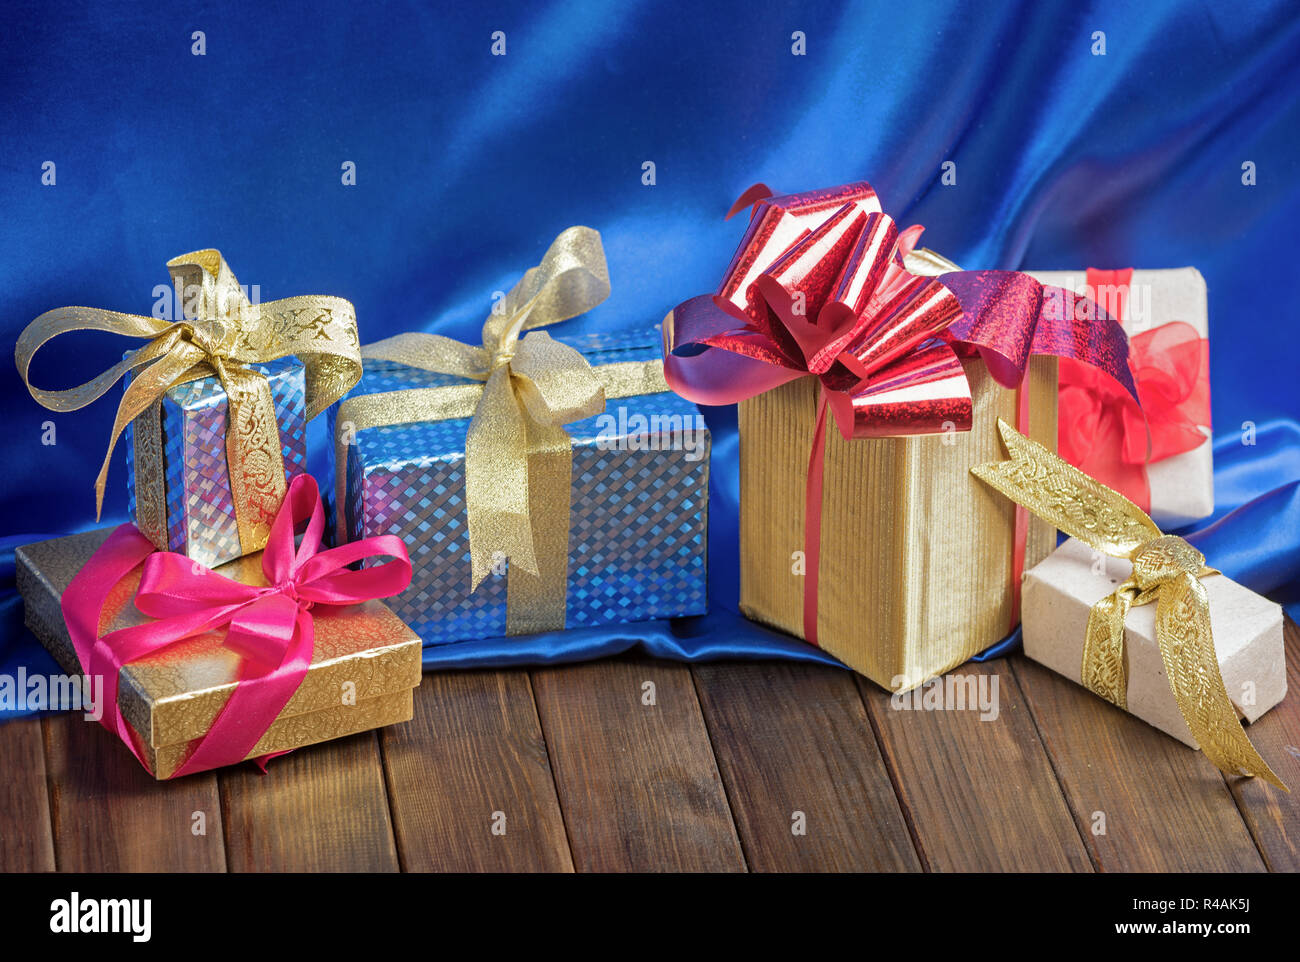 Gift boxes with ribbons on wooden table and blue silk Stock Photo